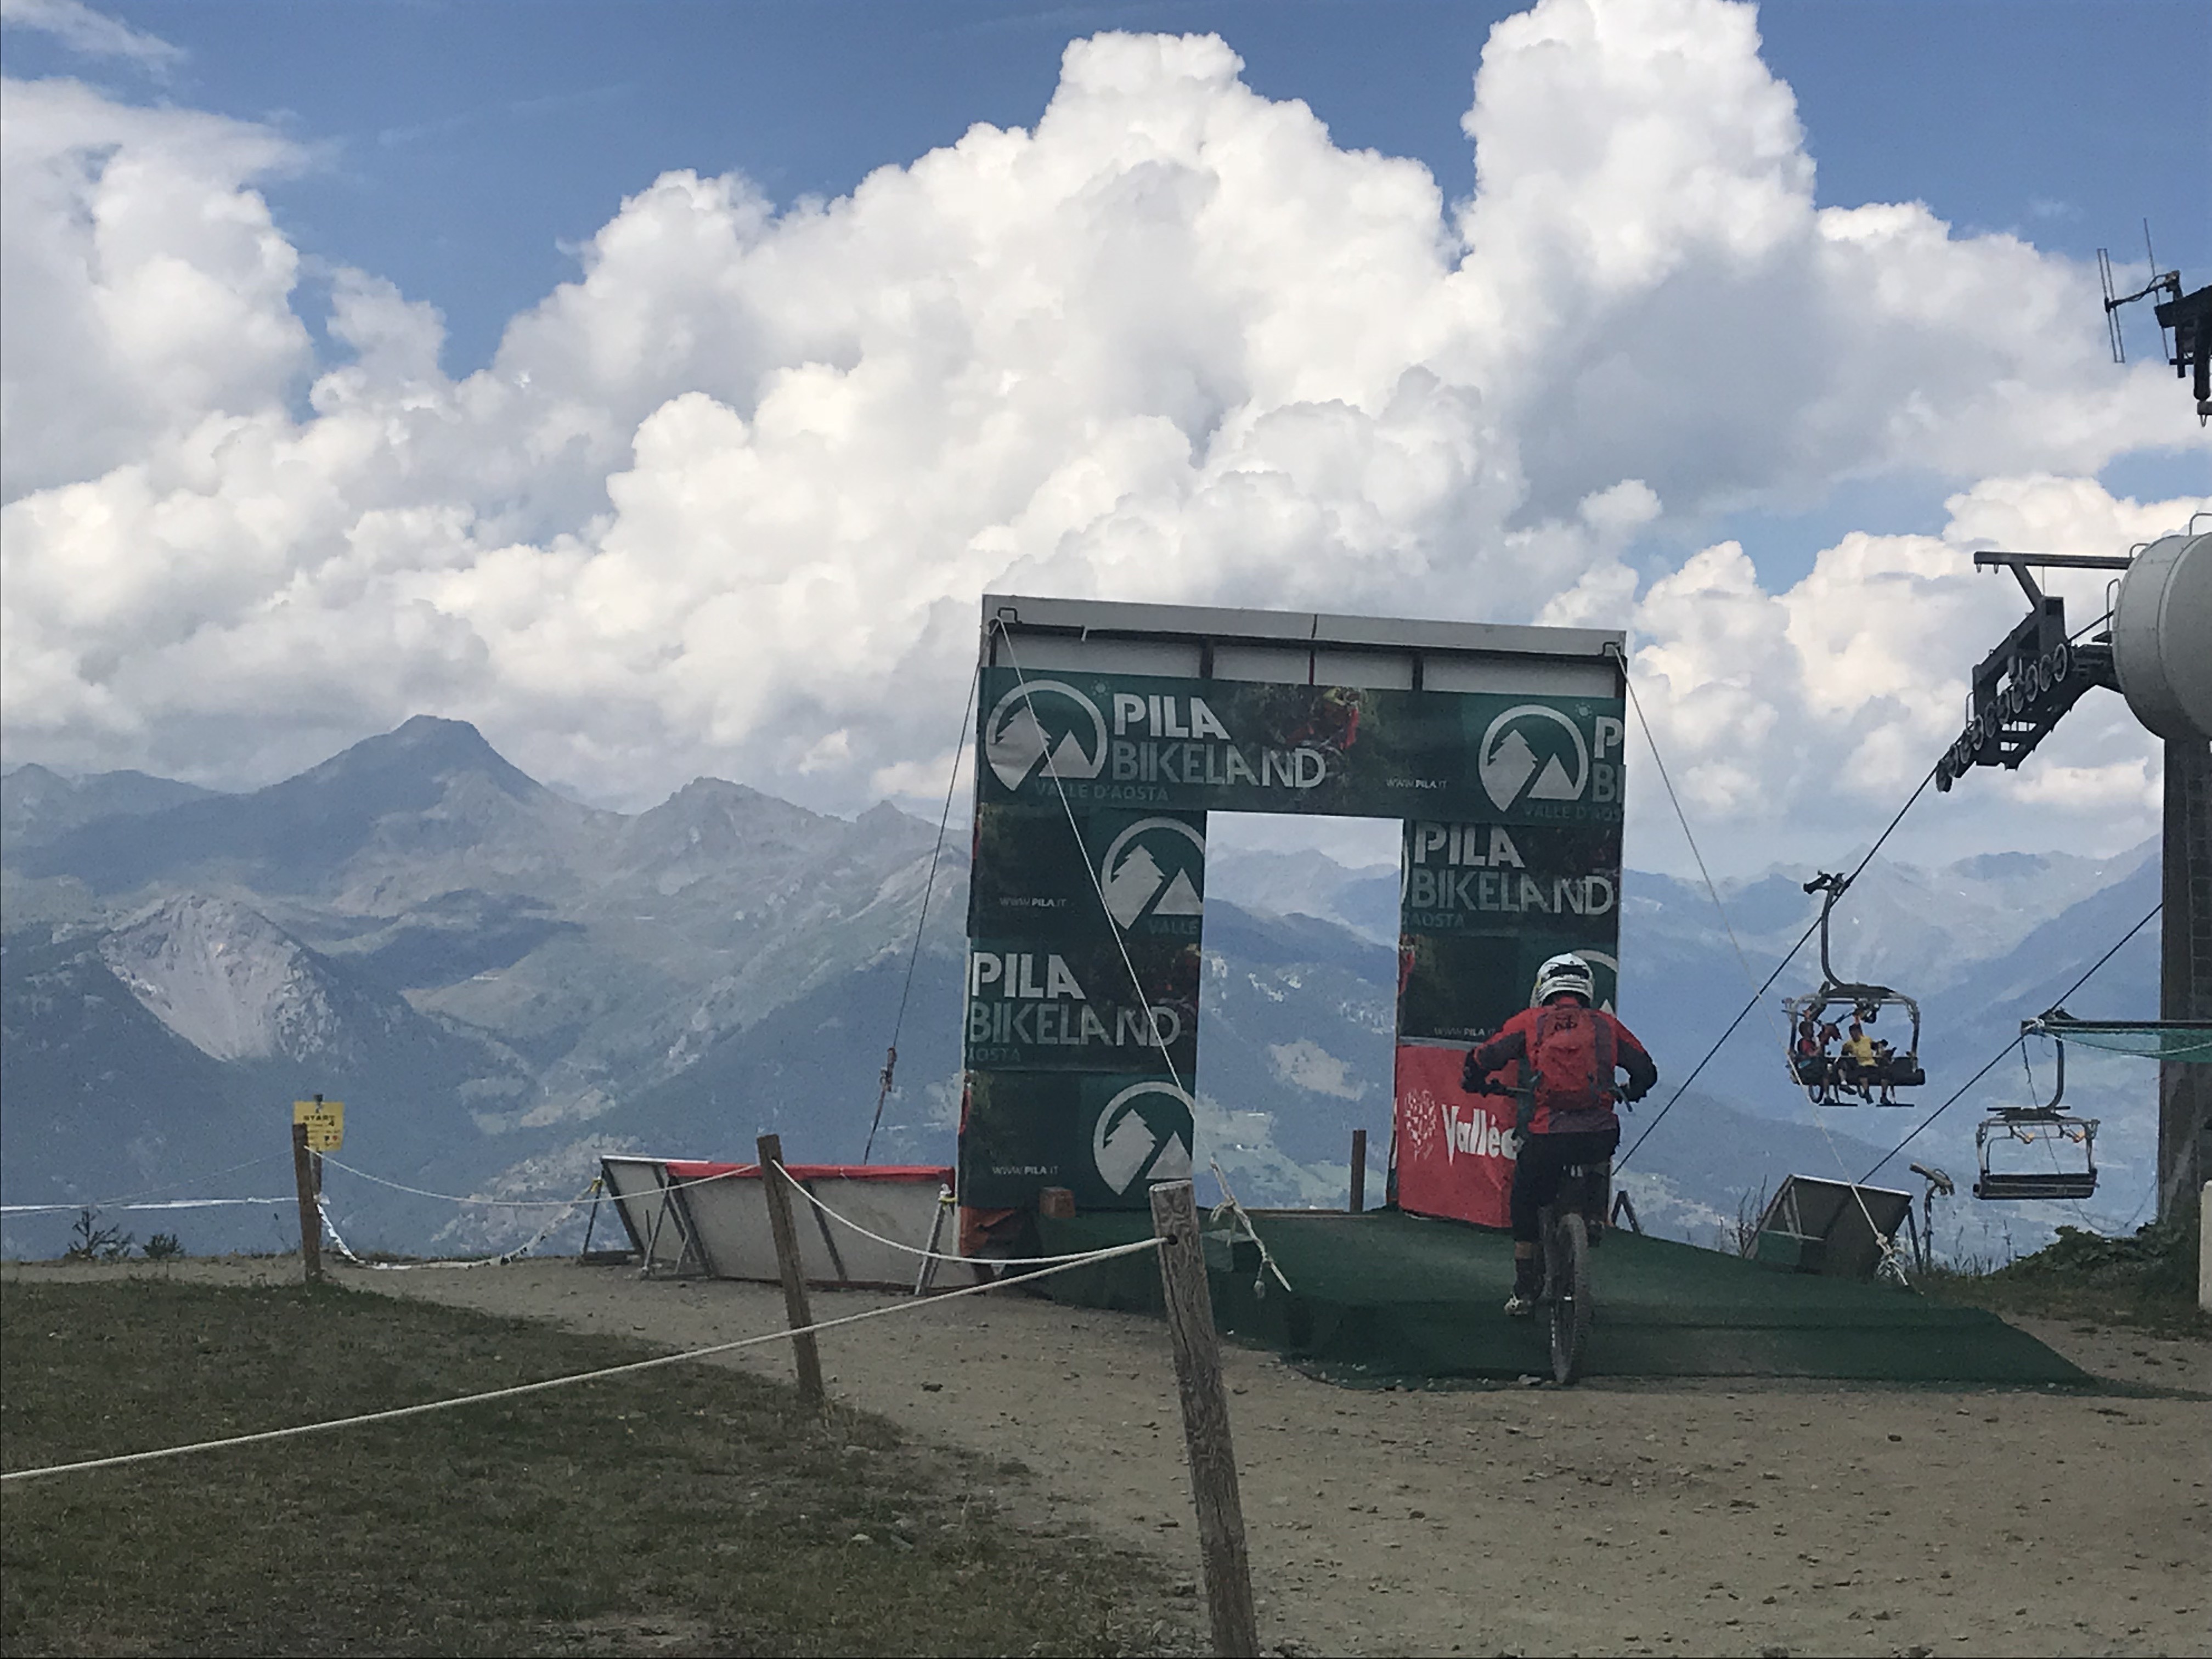 The top of the bike stadium on Piste 2. Our family hike in Pila during the past summer holiday